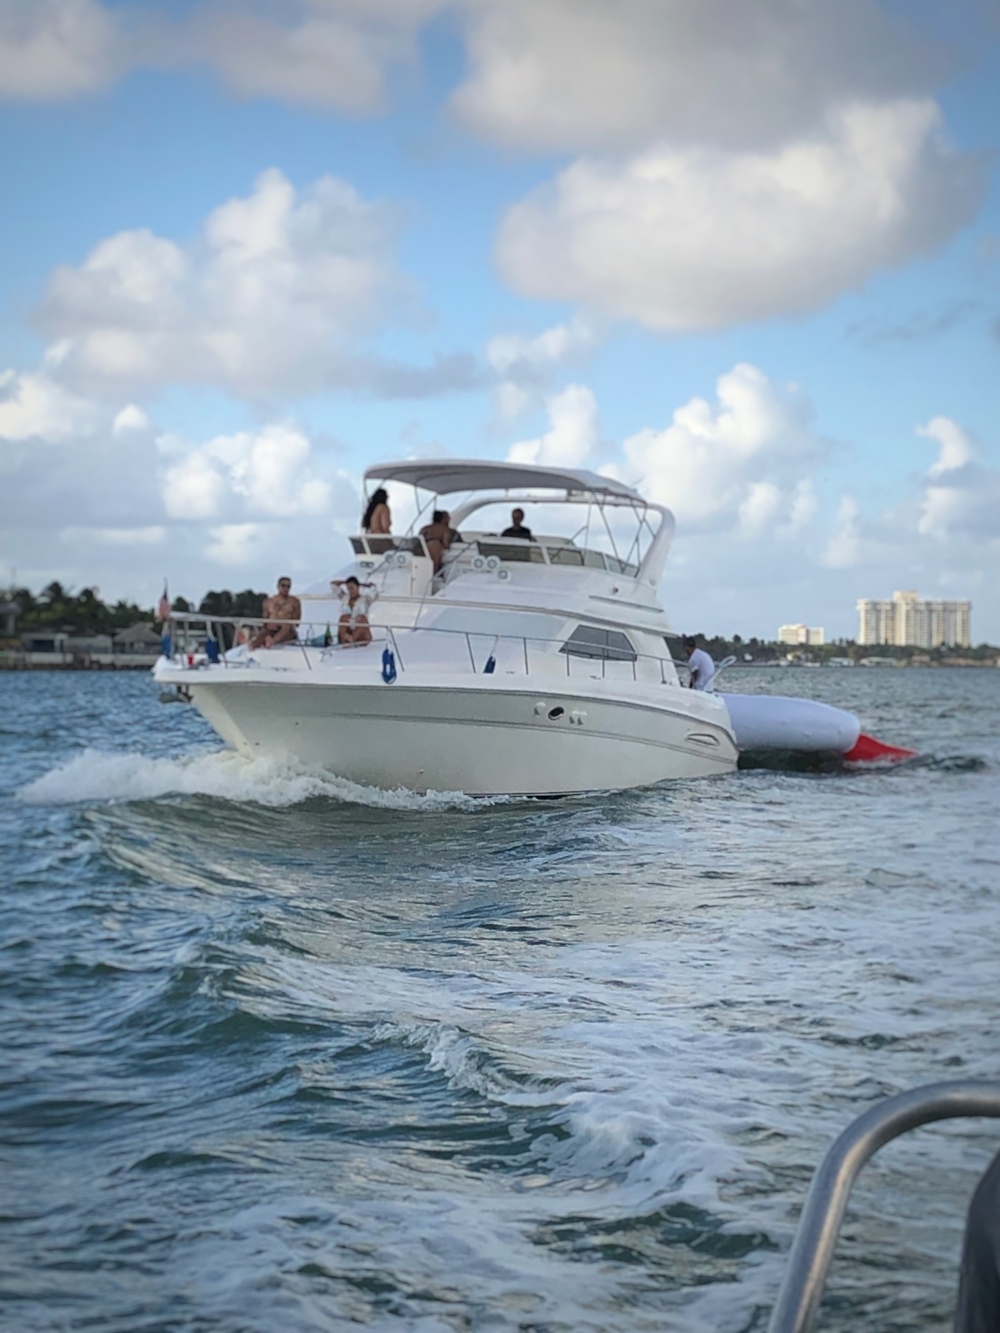 Coast Guard halts illegal charter operation in Biscayne Bay